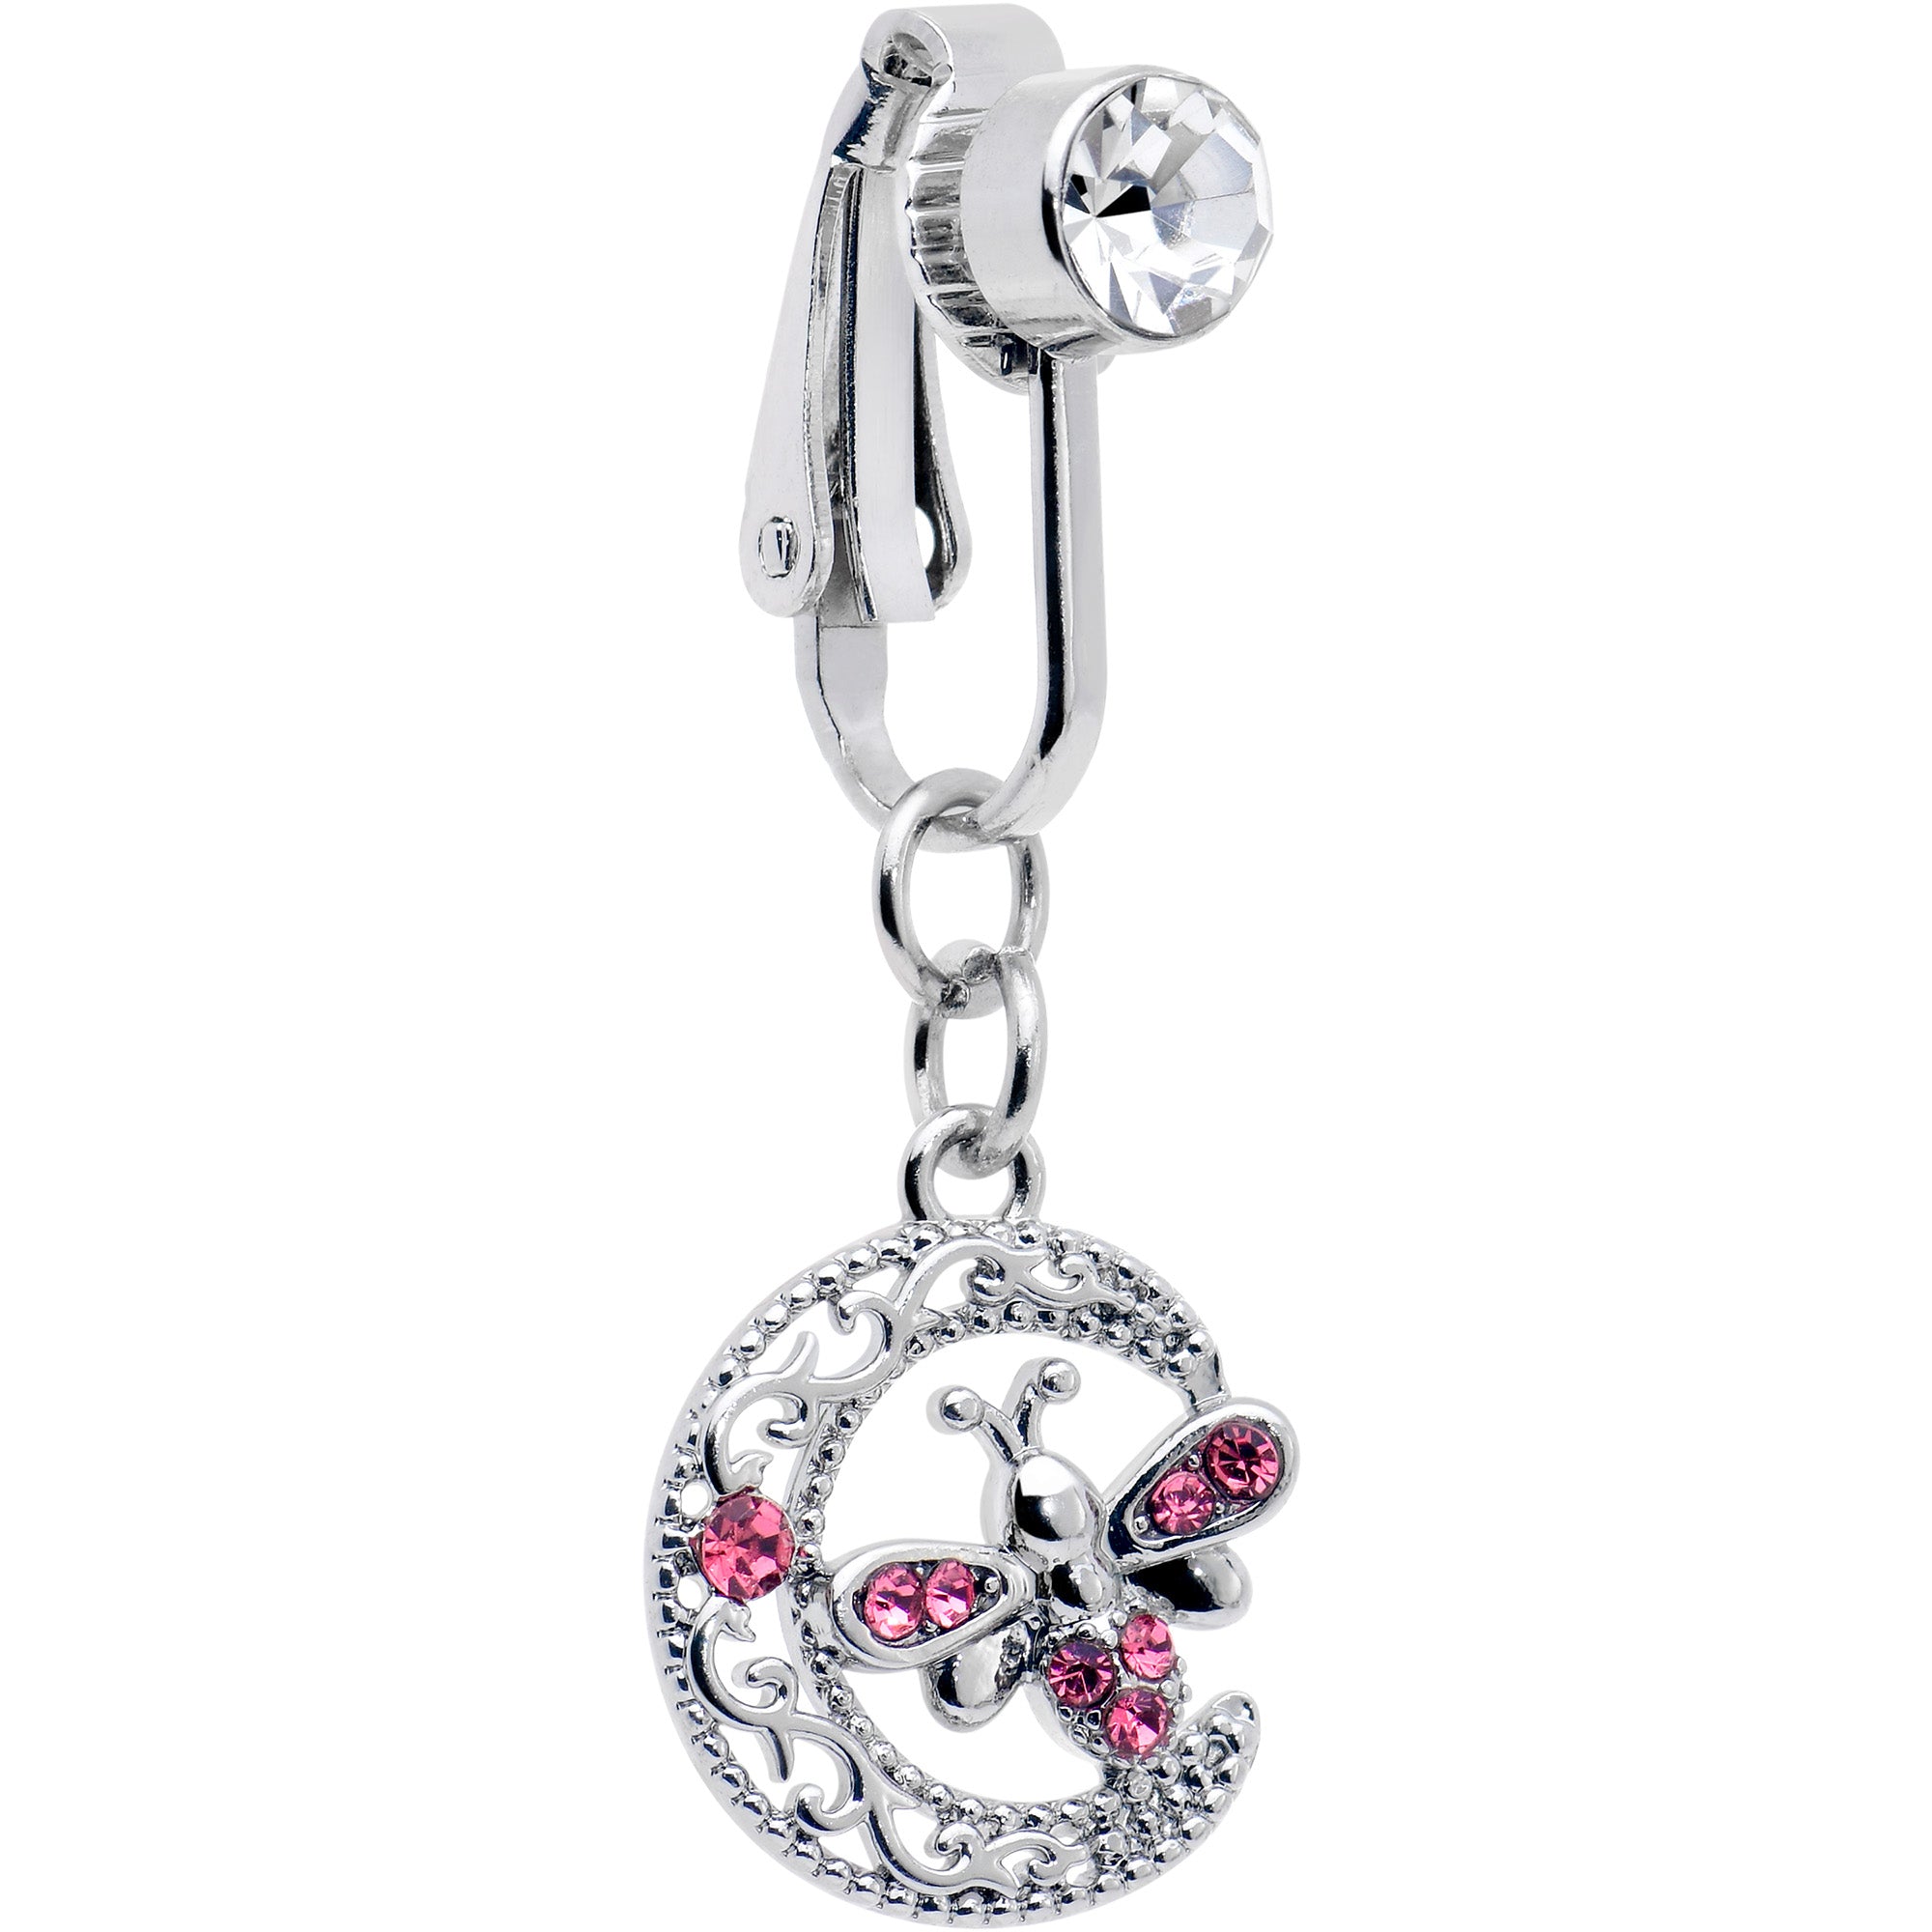 Body Jewelry, belly button rings, body piercing jewelry, nose rings